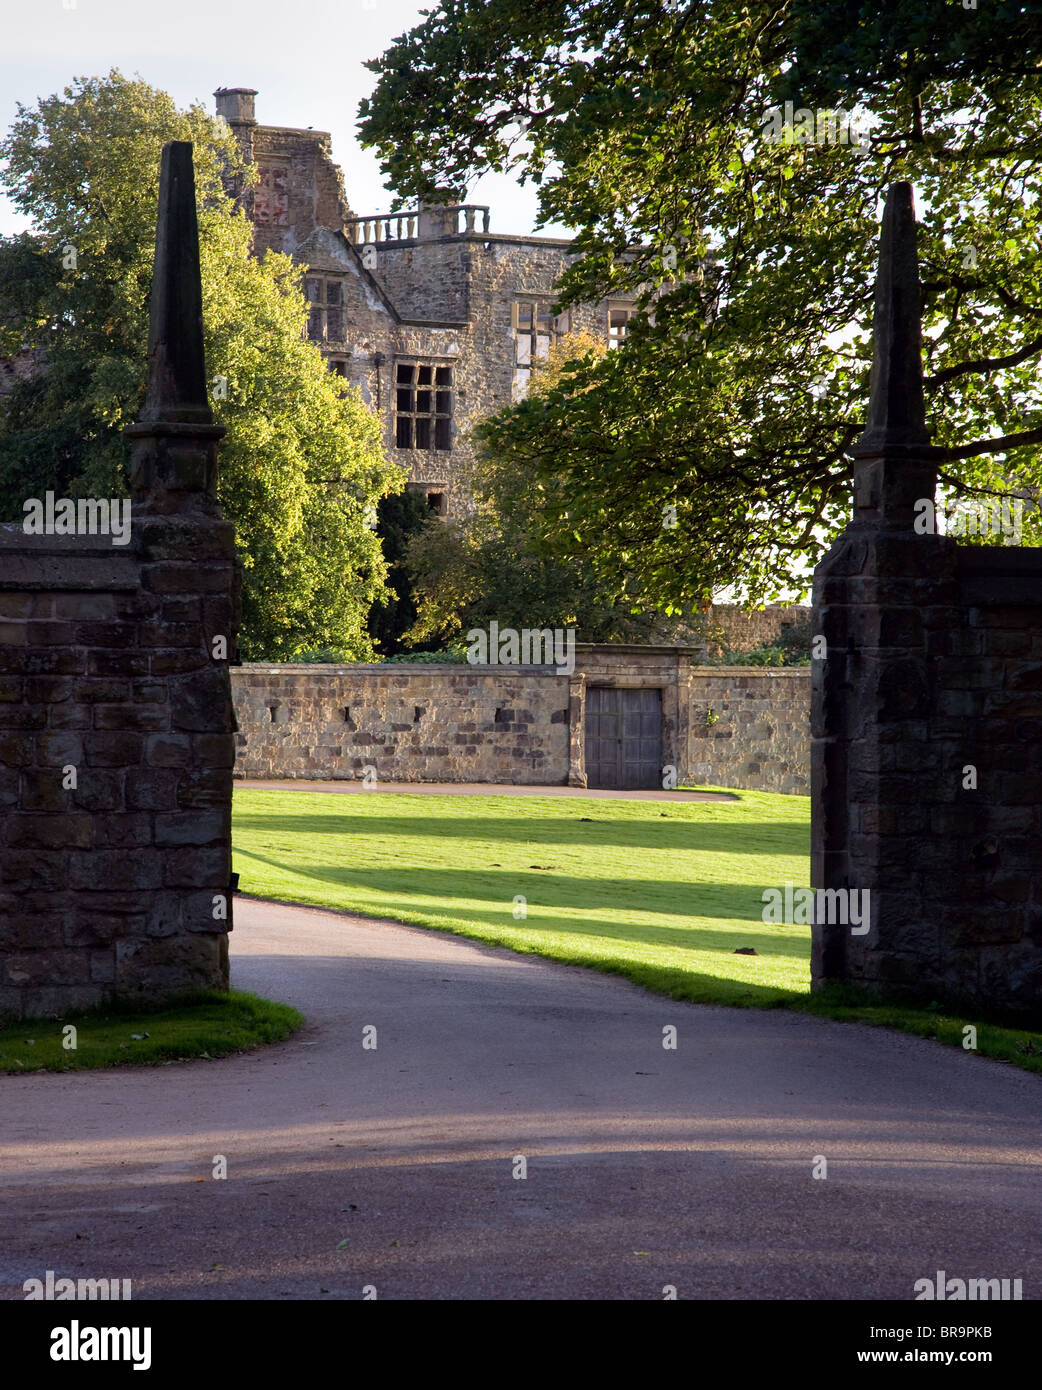 The ruined Hardwick Old Hall Derbyshire seen through the obelisk gate posts flanking the road Stock Photo